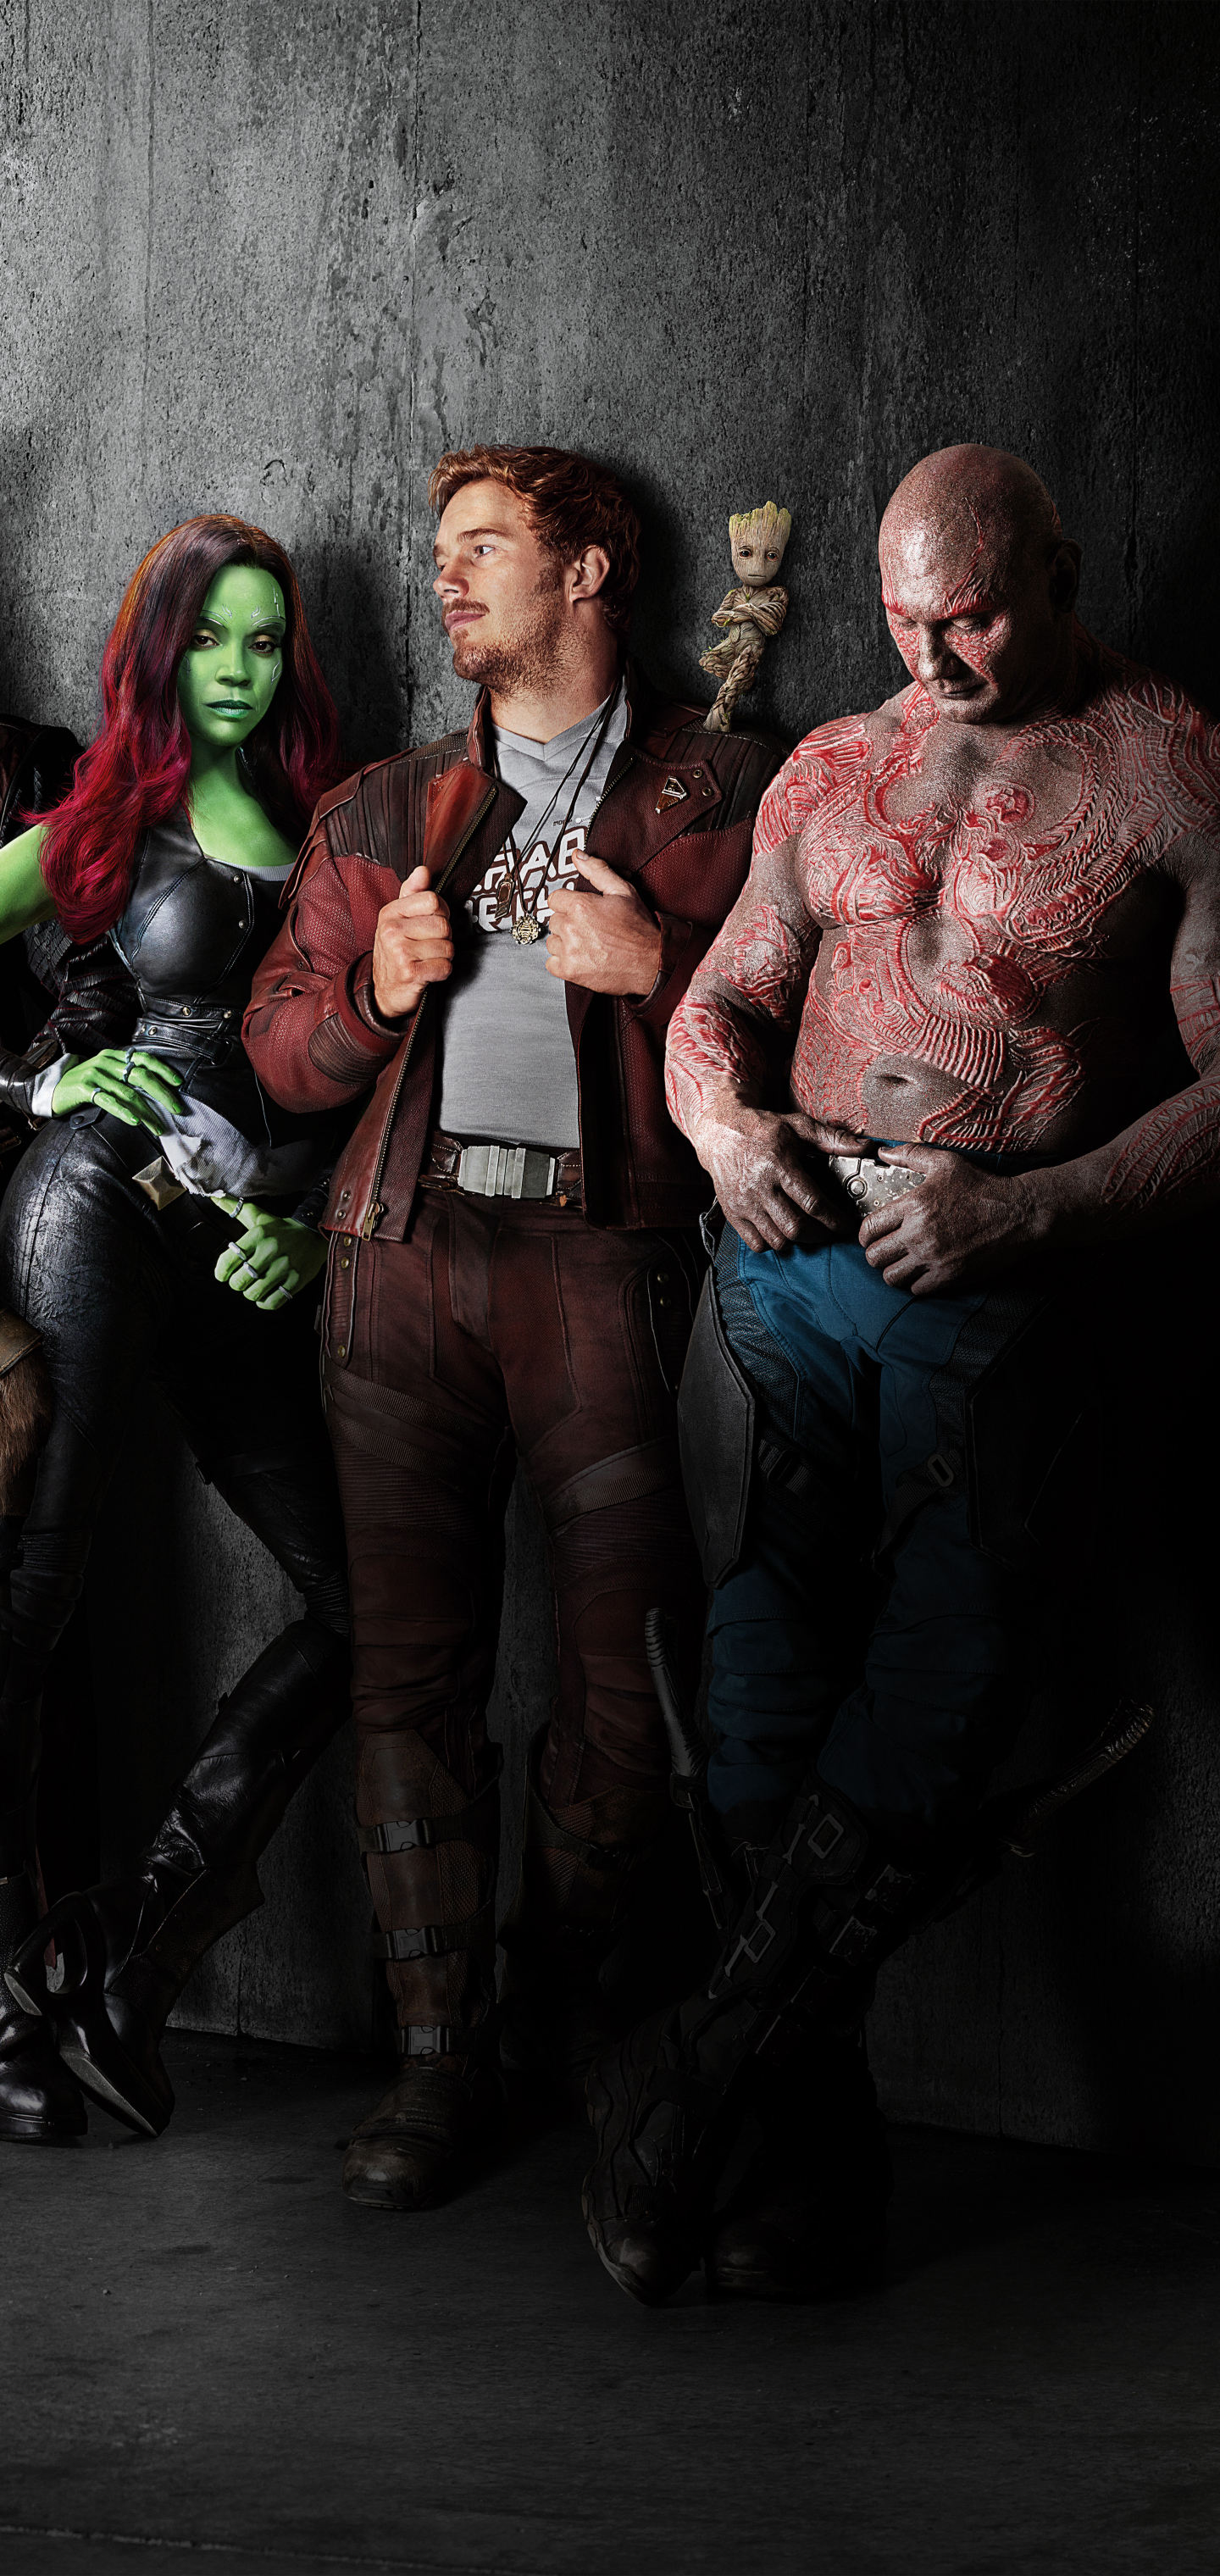 Download mobile wallpaper Movie, Zoe Saldana, Star Lord, Drax The Destroyer, Gamora, Groot, Chris Pratt, Dave Bautista, Peter Quill, Guardians Of The Galaxy Vol 2, Baby Groot for free.